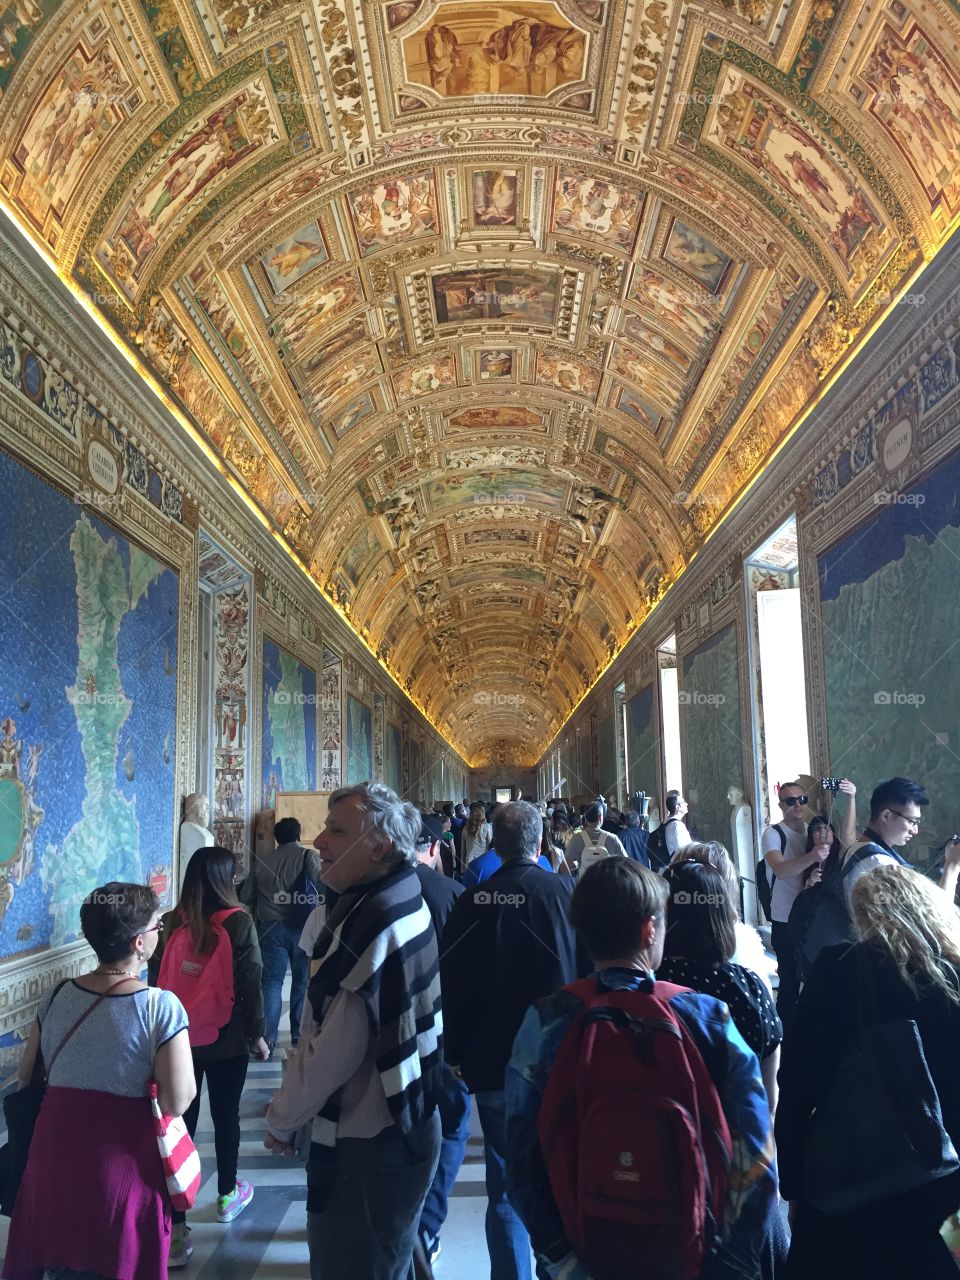 On the way to the Sistine Chapel